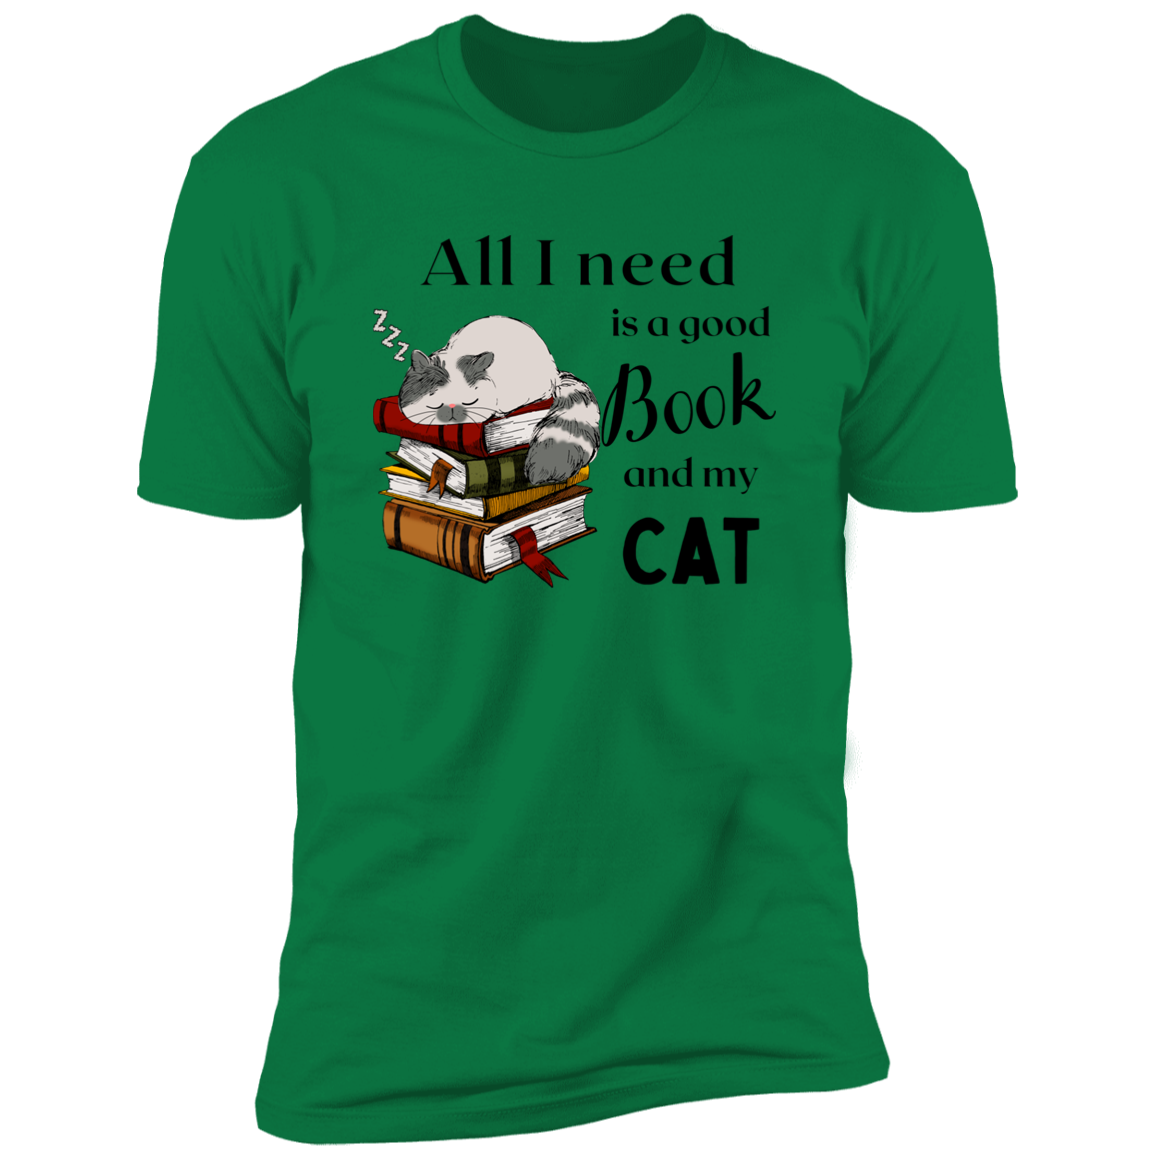 All I Need is a Good Book and My Cat t-shirt for humans, in kelly green